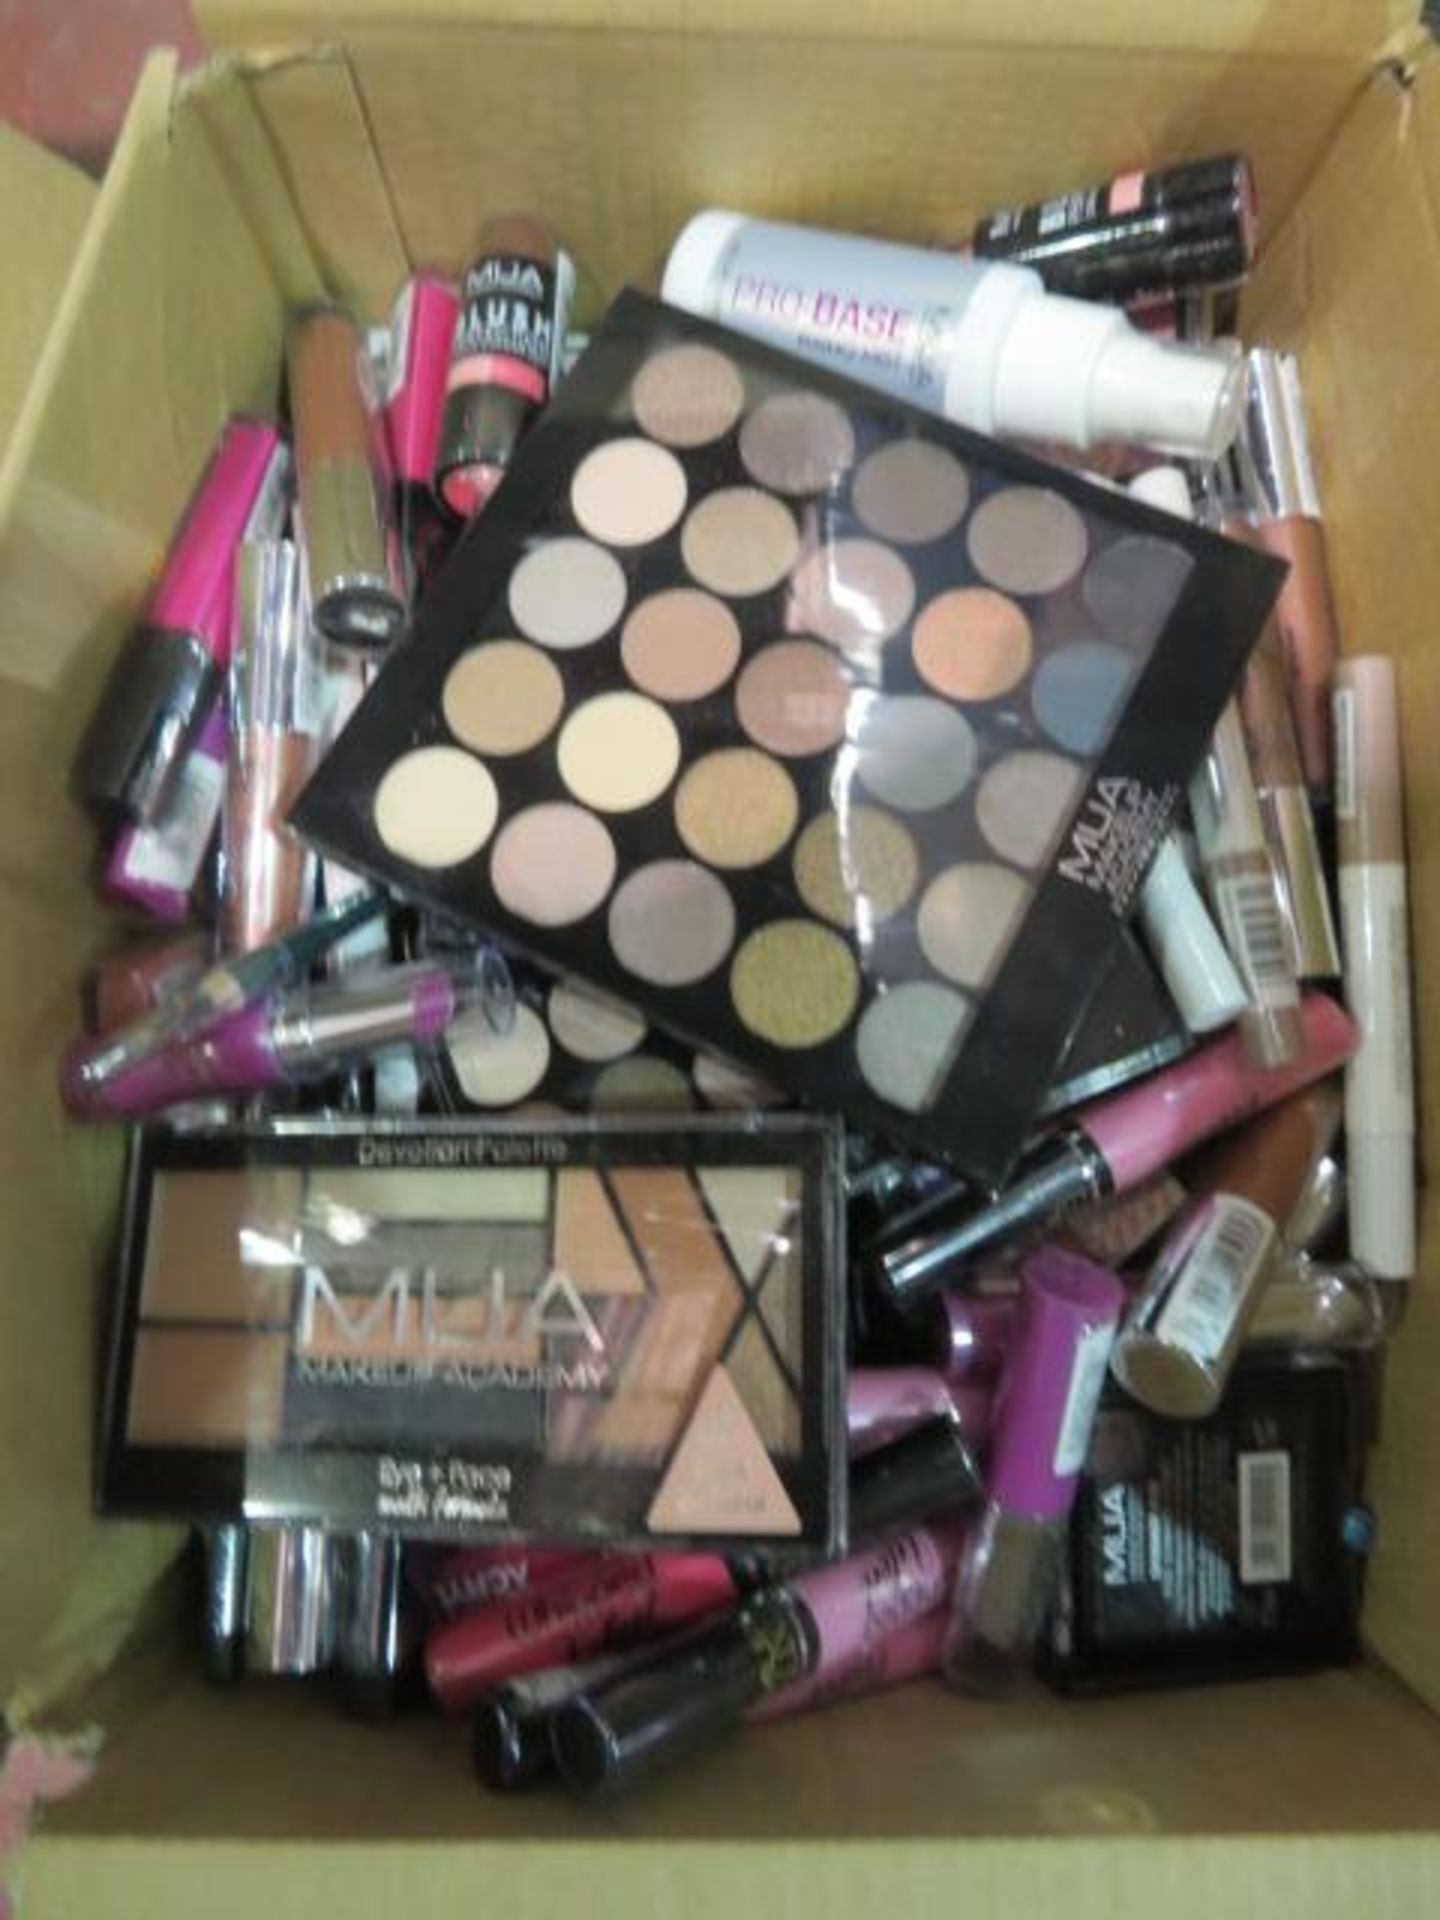 Circa. 200 items of various new make up acadamy make up to include: ultimate undressed palette,